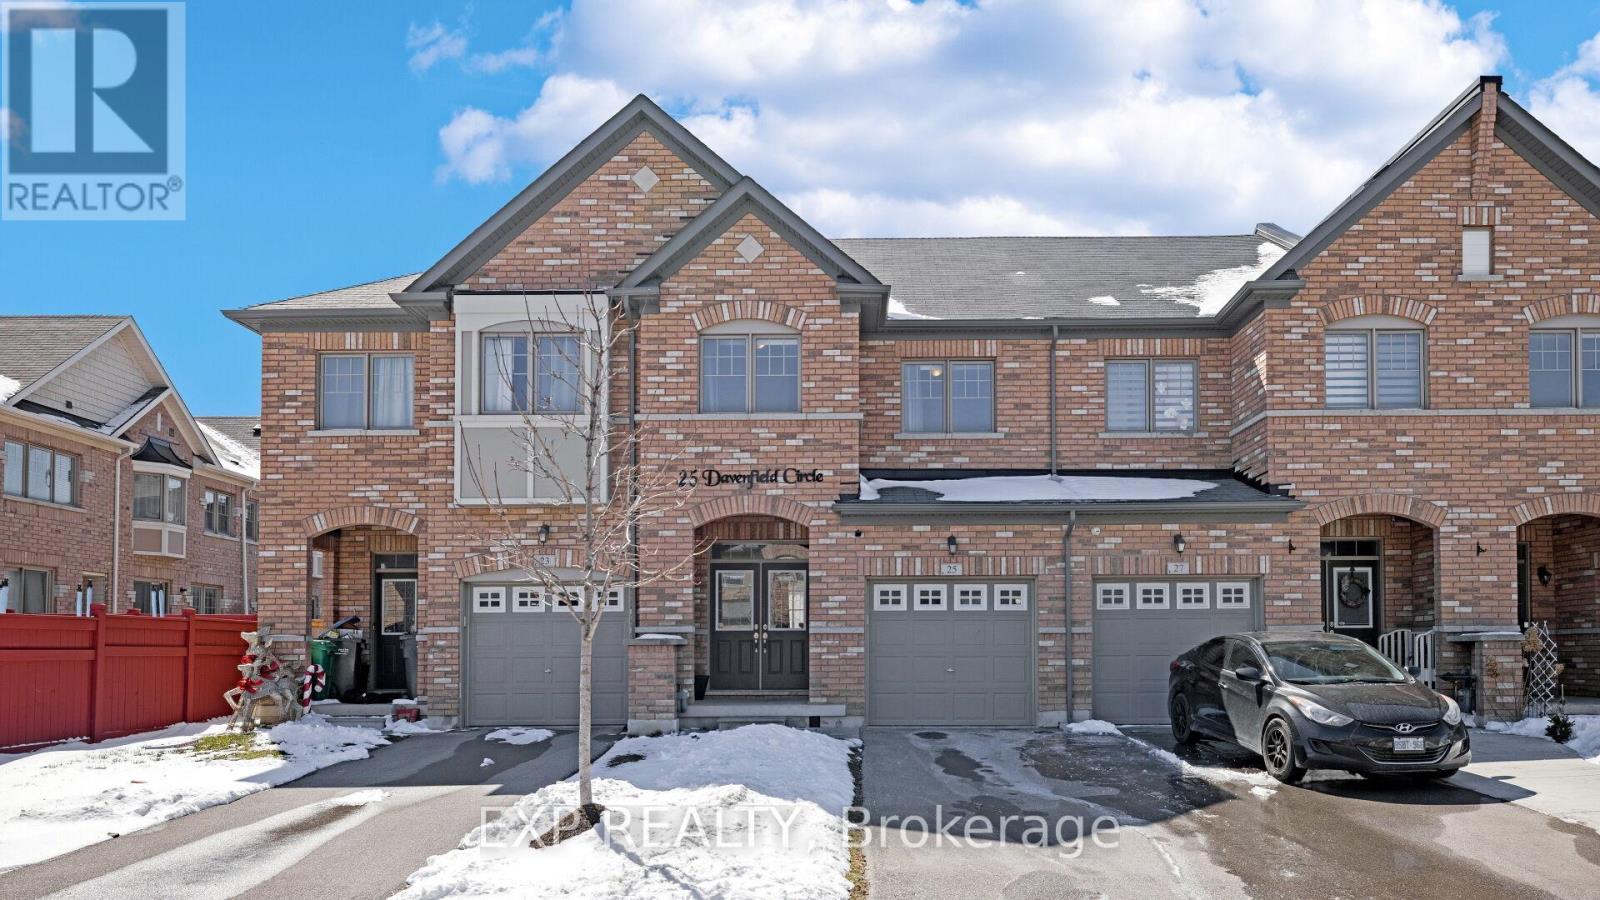 25 Davenfield Circle, Brampton, 5 Bedrooms Bedrooms, ,4 BathroomsBathrooms,Single Family,For Sale,Davenfield,W8171648